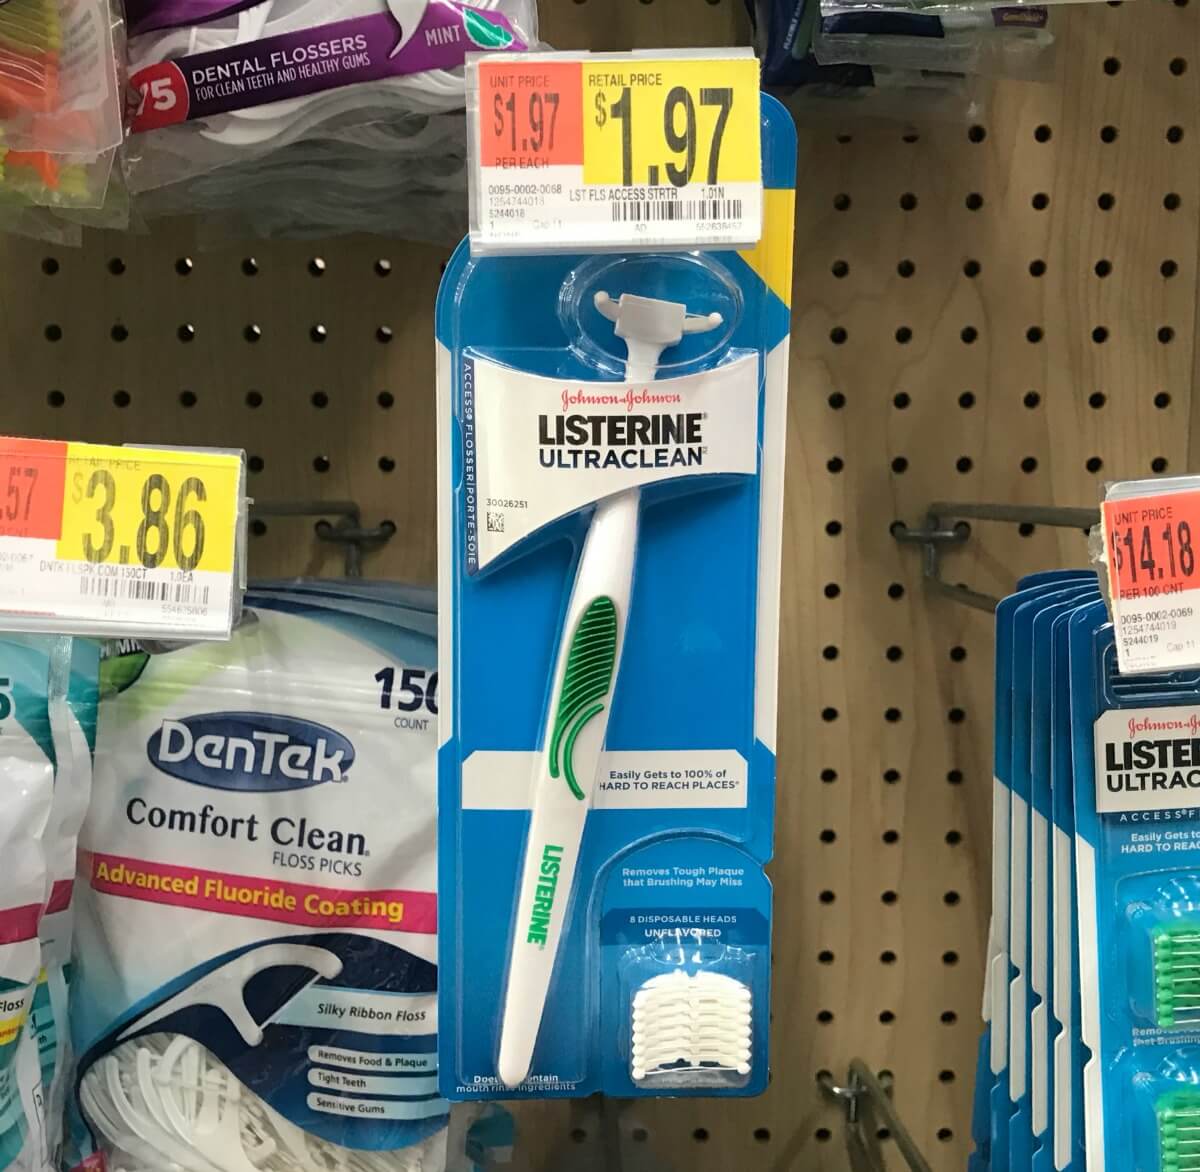 free-listerine-flosser-at-walmart-ibotta-rebate-living-rich-with-coupons